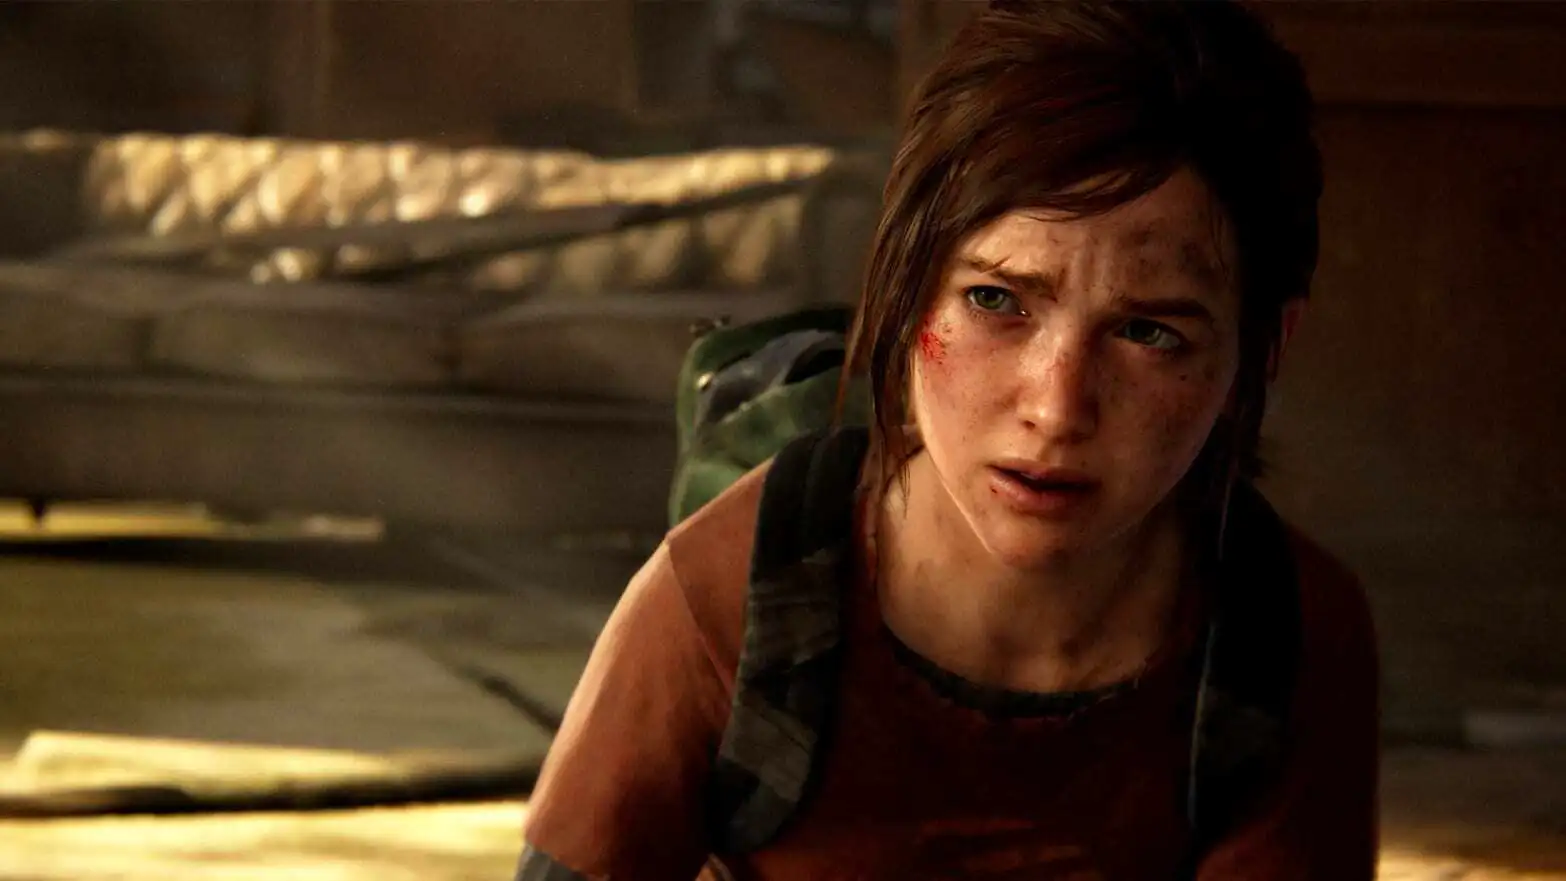 Ellie from The Last of Us Part 1